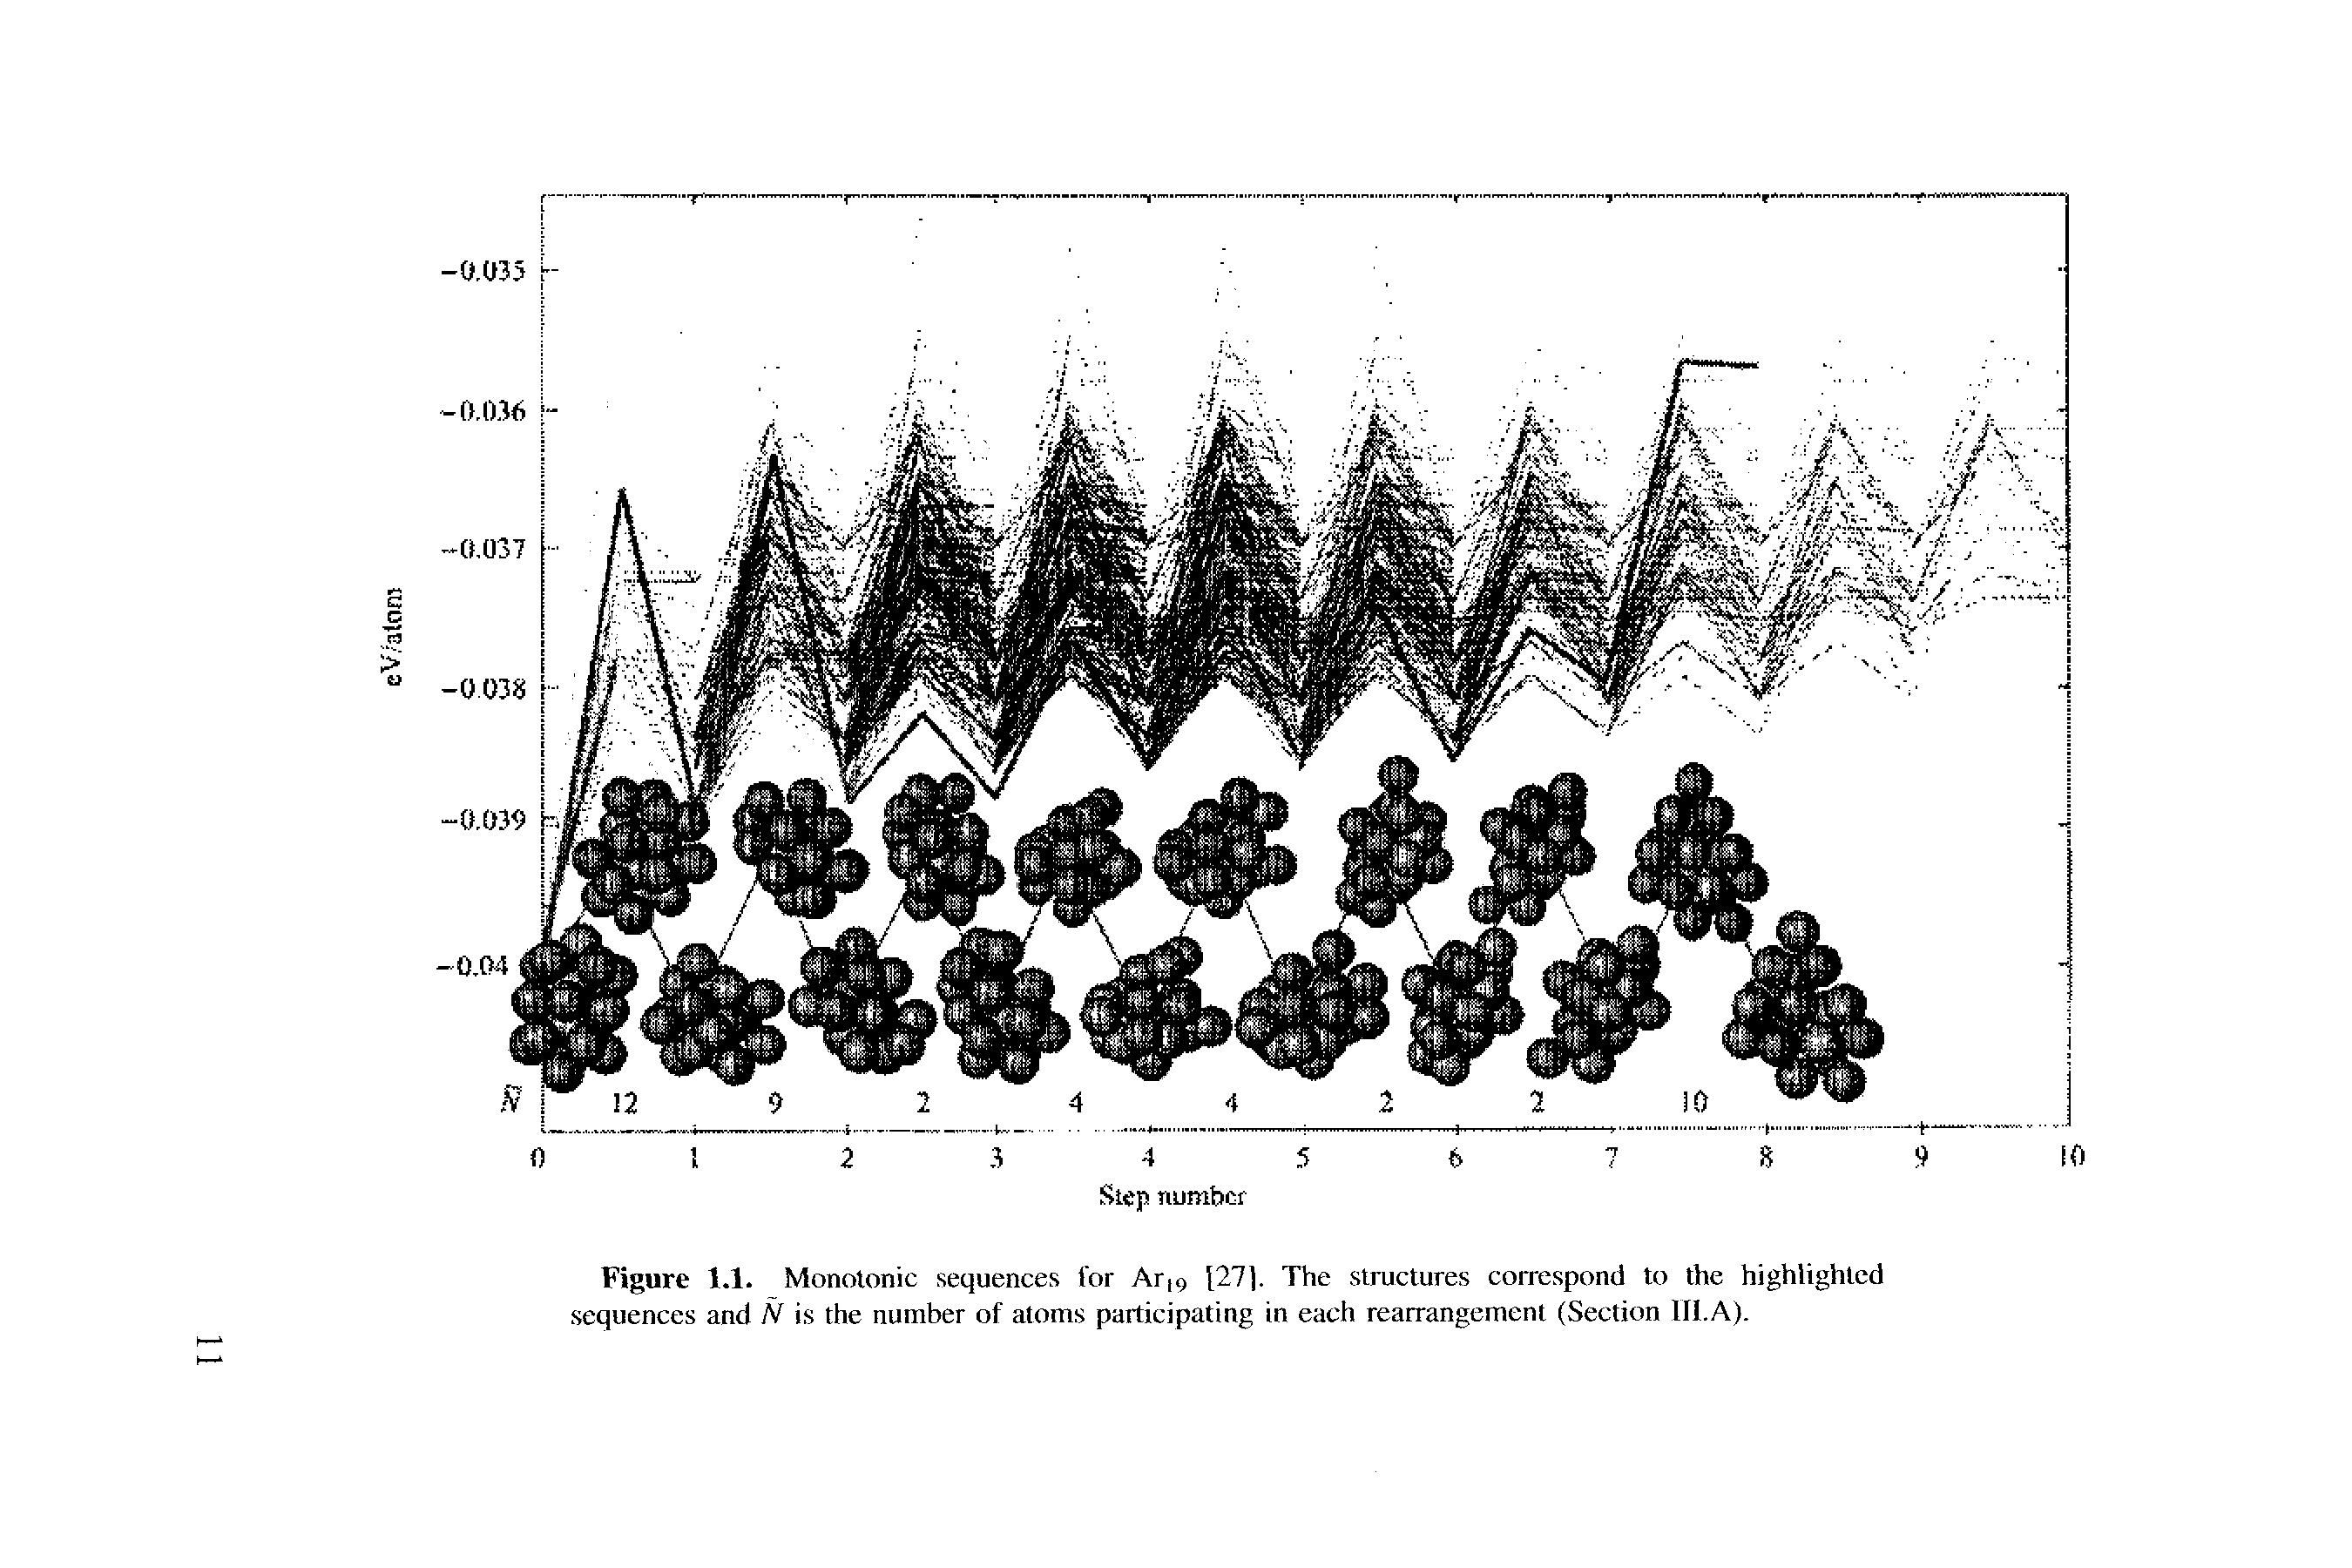 Figure 1.1. Monotonic sequences for Ar,9 27). The structures correspond to the highlighted sequences and N is the number of atoms participating in each rearrangement (Section III.A).